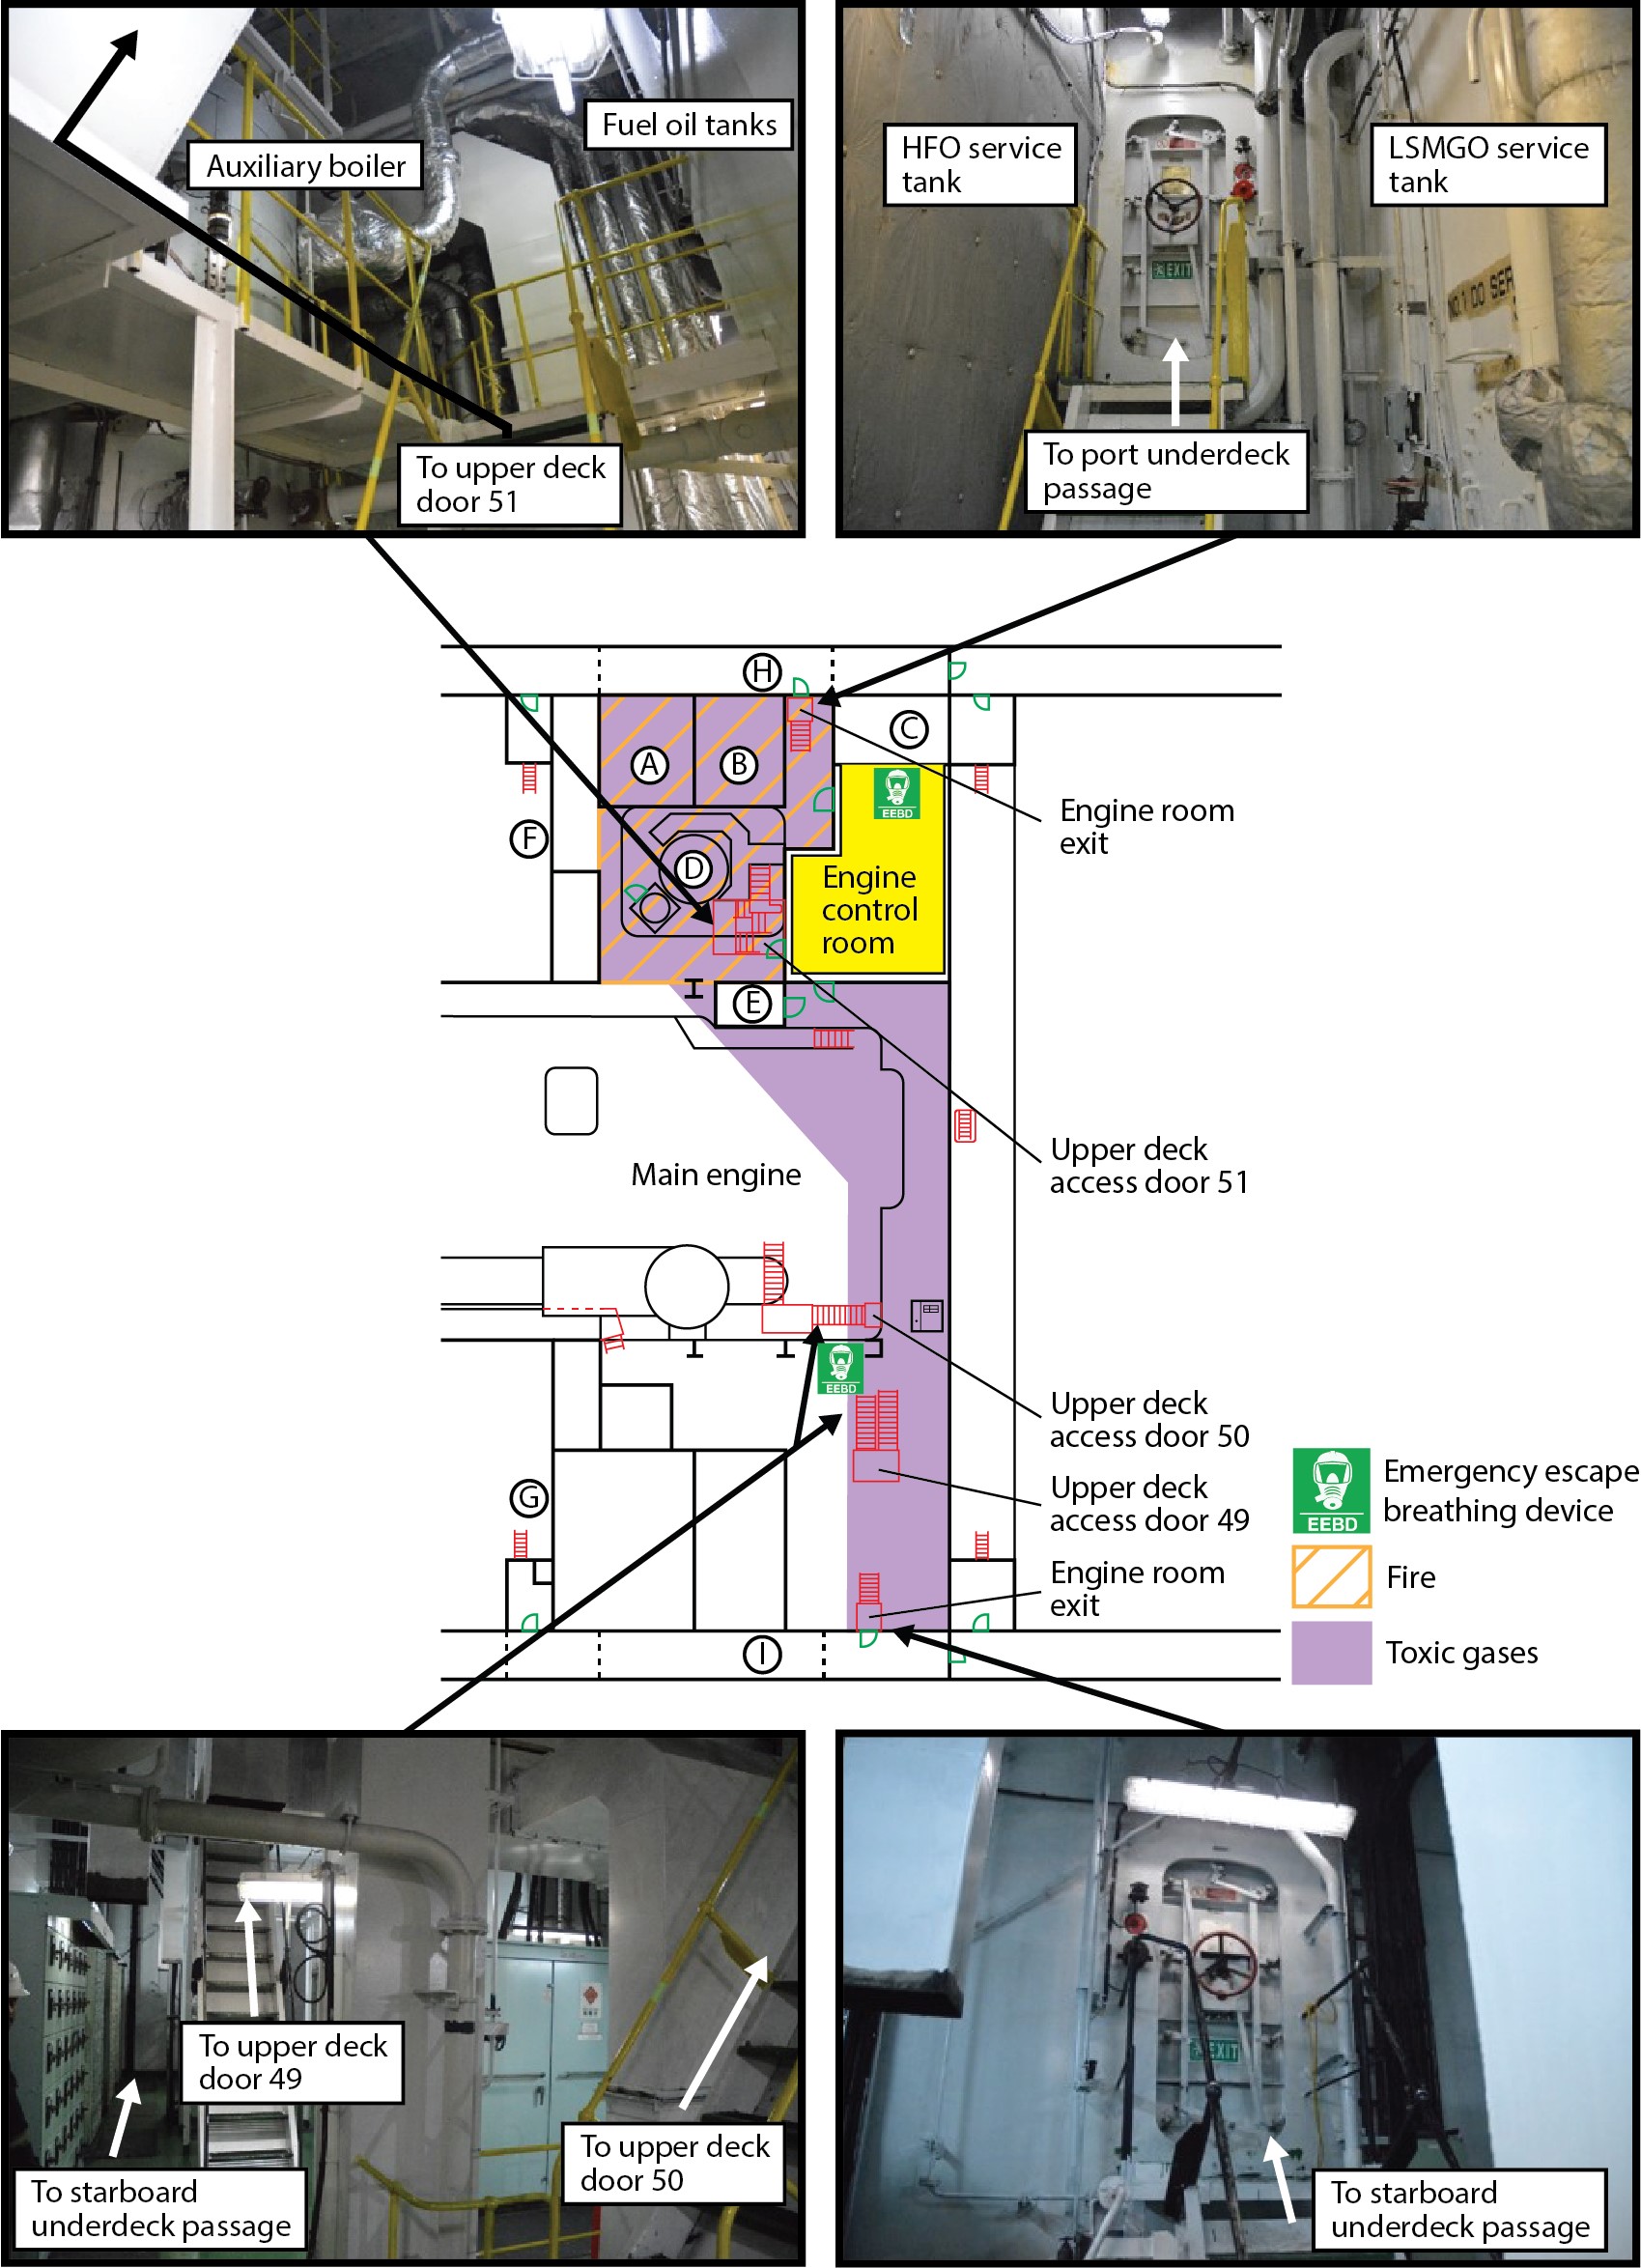 Photos and diagram showing the means of escape from the engine room. The diagram provides an overhead view of deck 2, showing the 5 possible exits from the engine room. The photos show these exits, with black lines indicating the location of the photos. (Source: <em>MOL Prestige</em> deck 2 plan, with TSB photos and annotations)